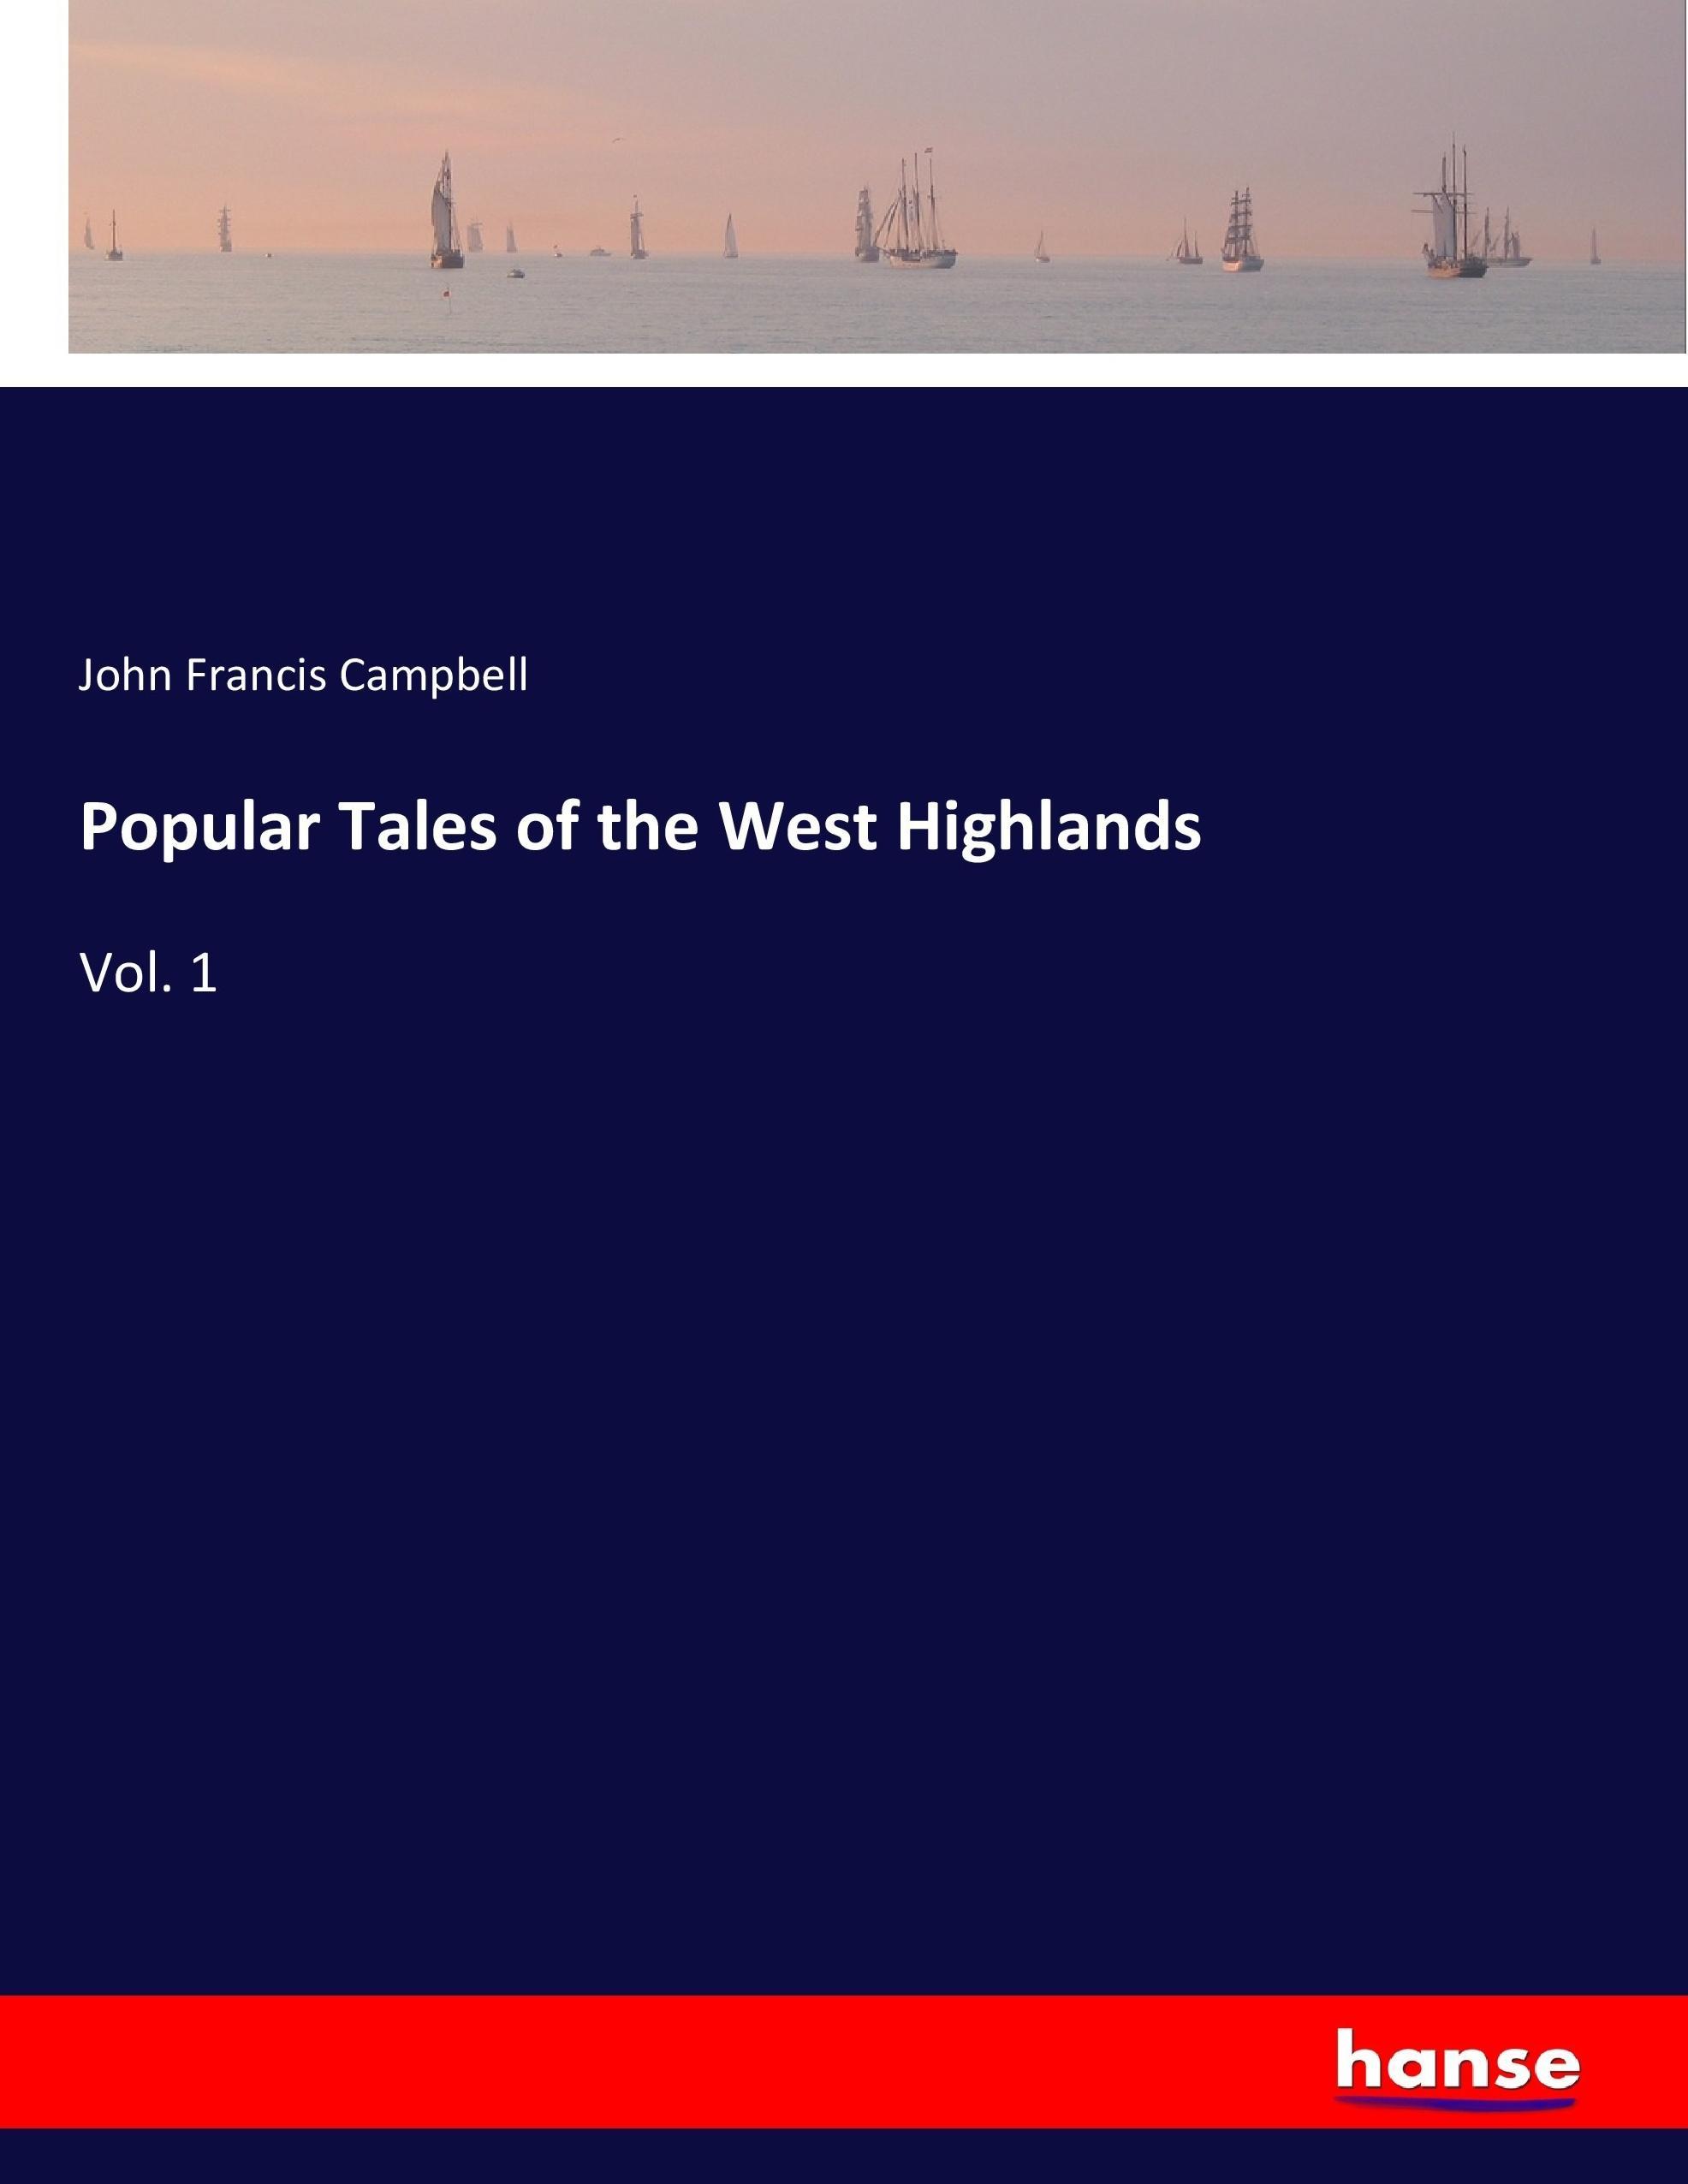 Popular Tales of the West Highlands / Vol. 1 / John Francis Campbell / Taschenbuch / Paperback / 516 S. / Englisch / 2017 / hansebooks / EAN 9783744774185 - Campbell, John Francis